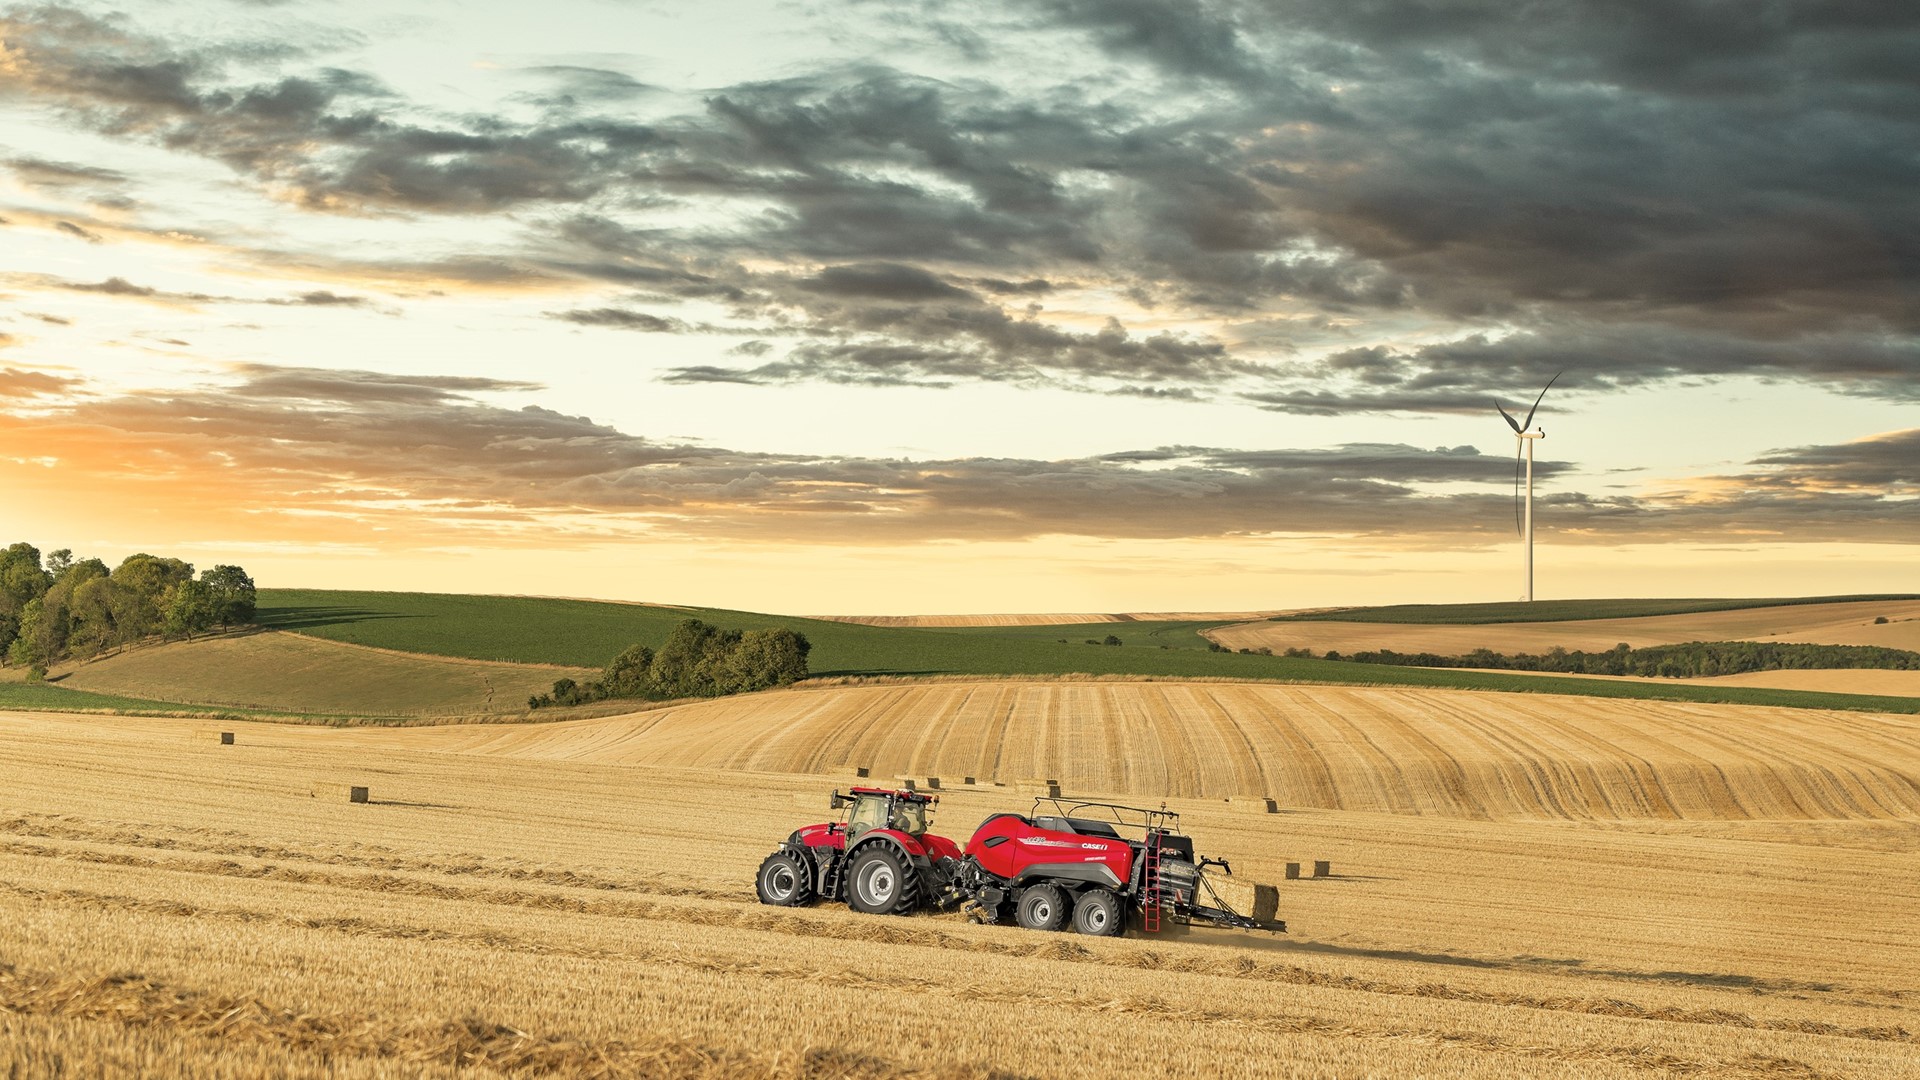 The new LB436 HD large square baler delivers more capacity and high-density bales